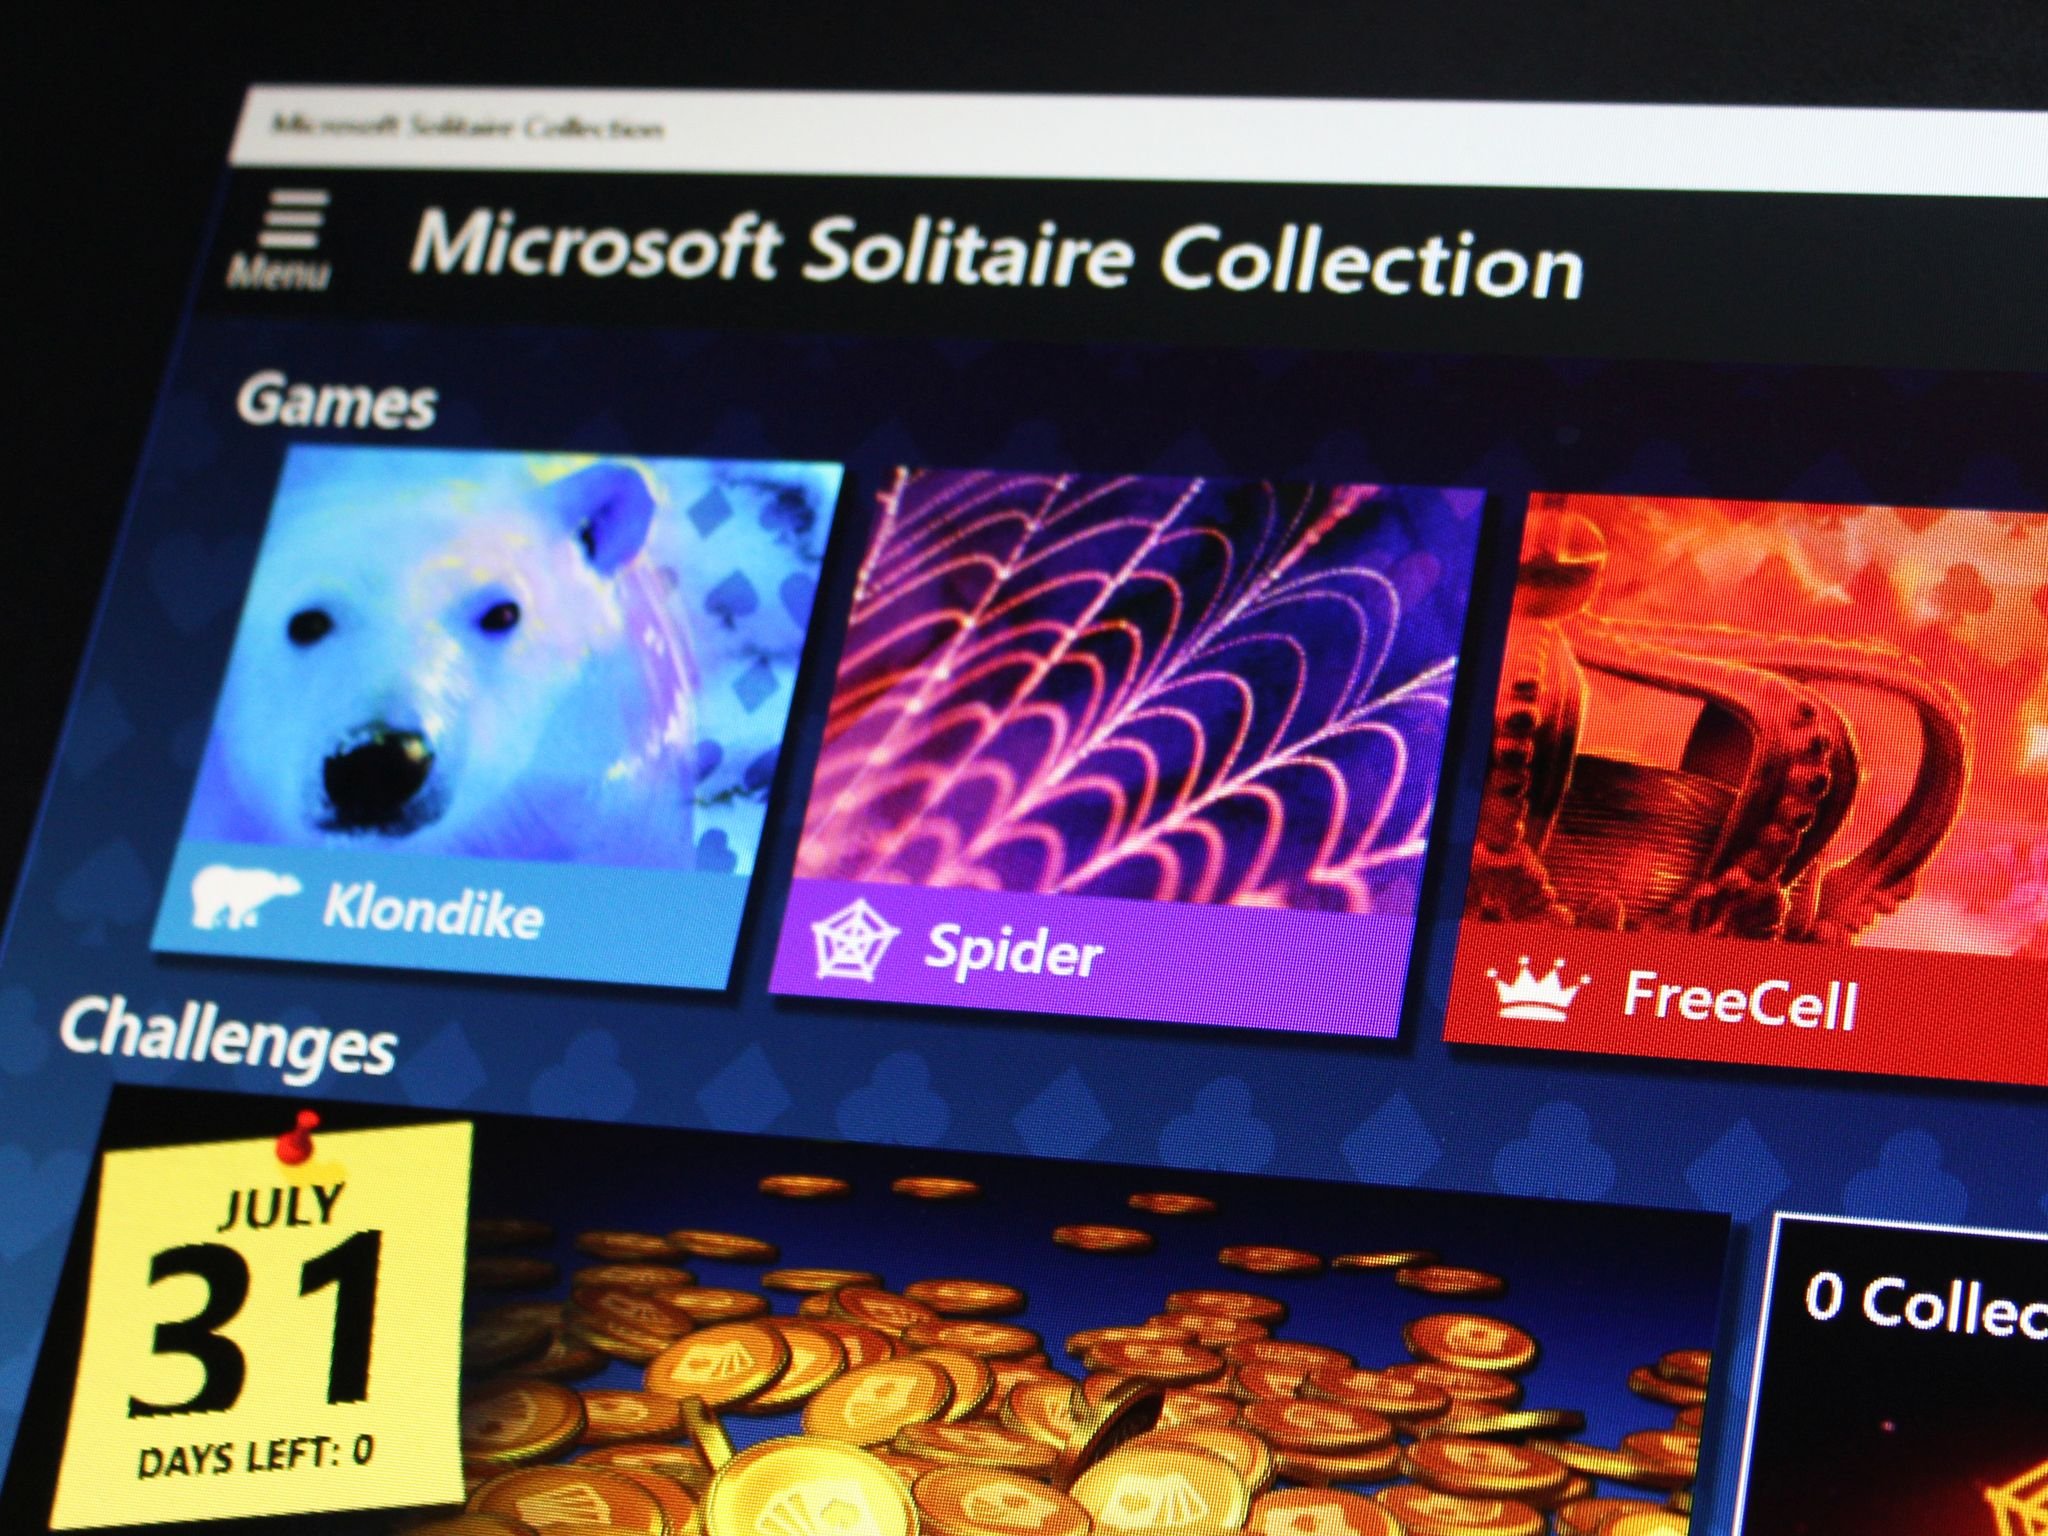 microsoft solitaire collection free download windows 10